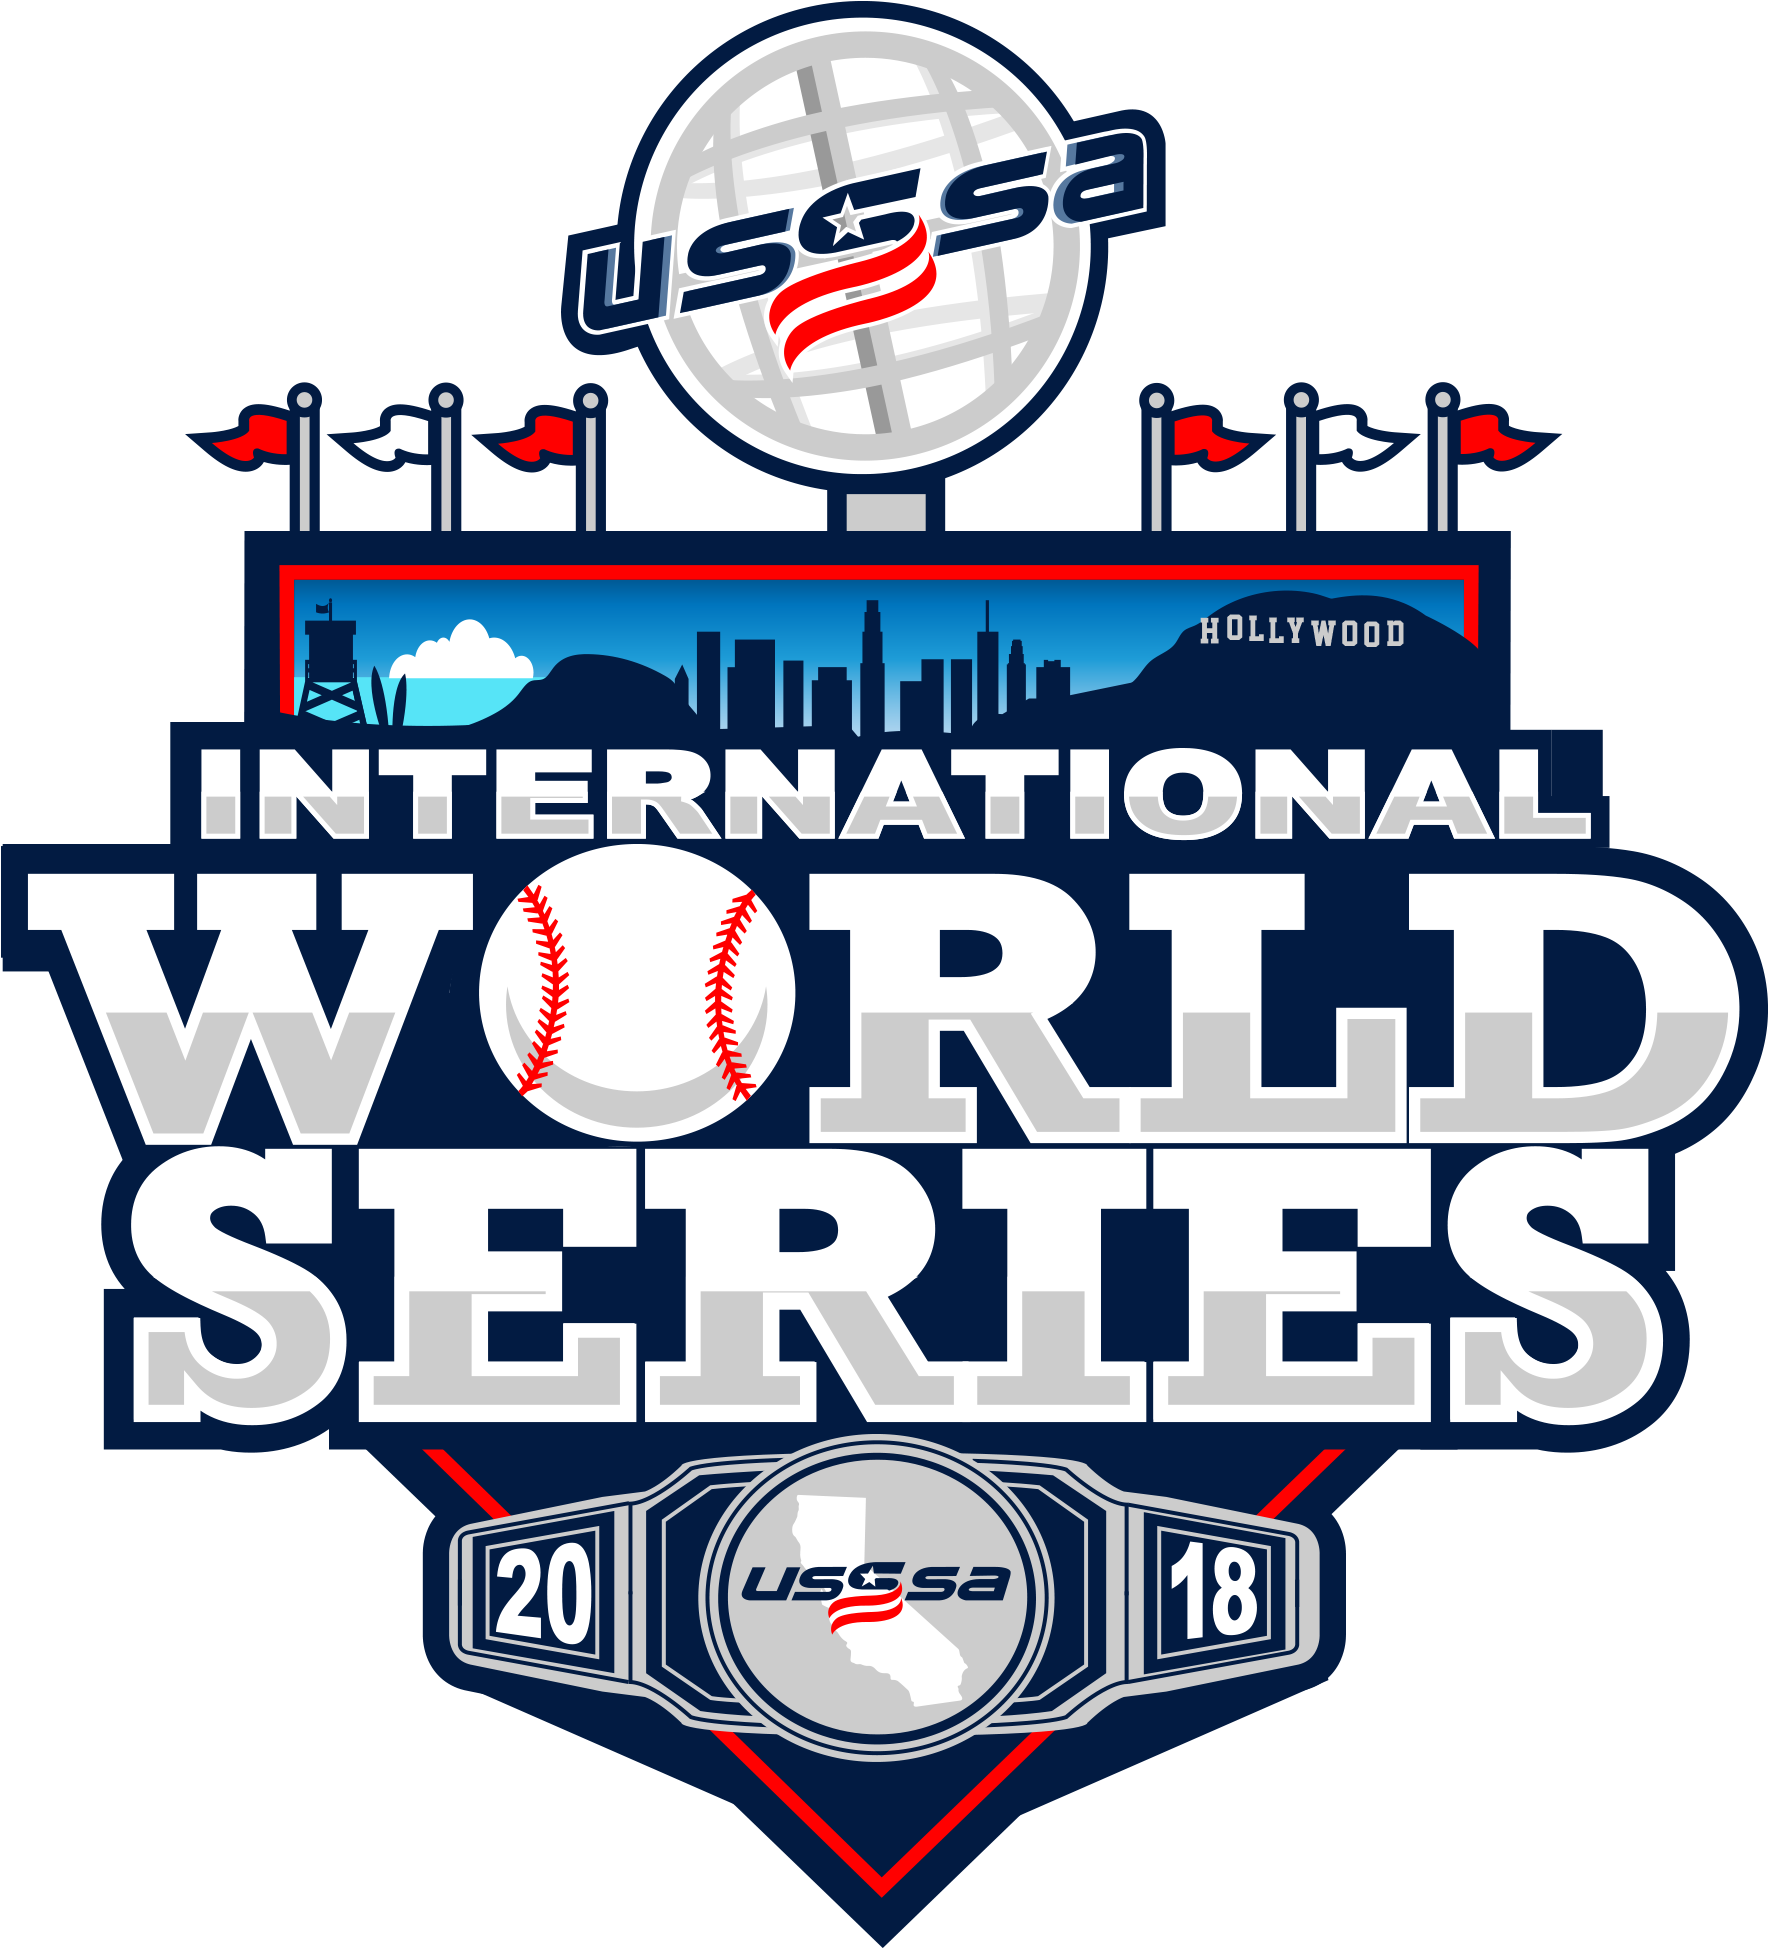 Click Here To Visit The Usssa International World Series Usssa World